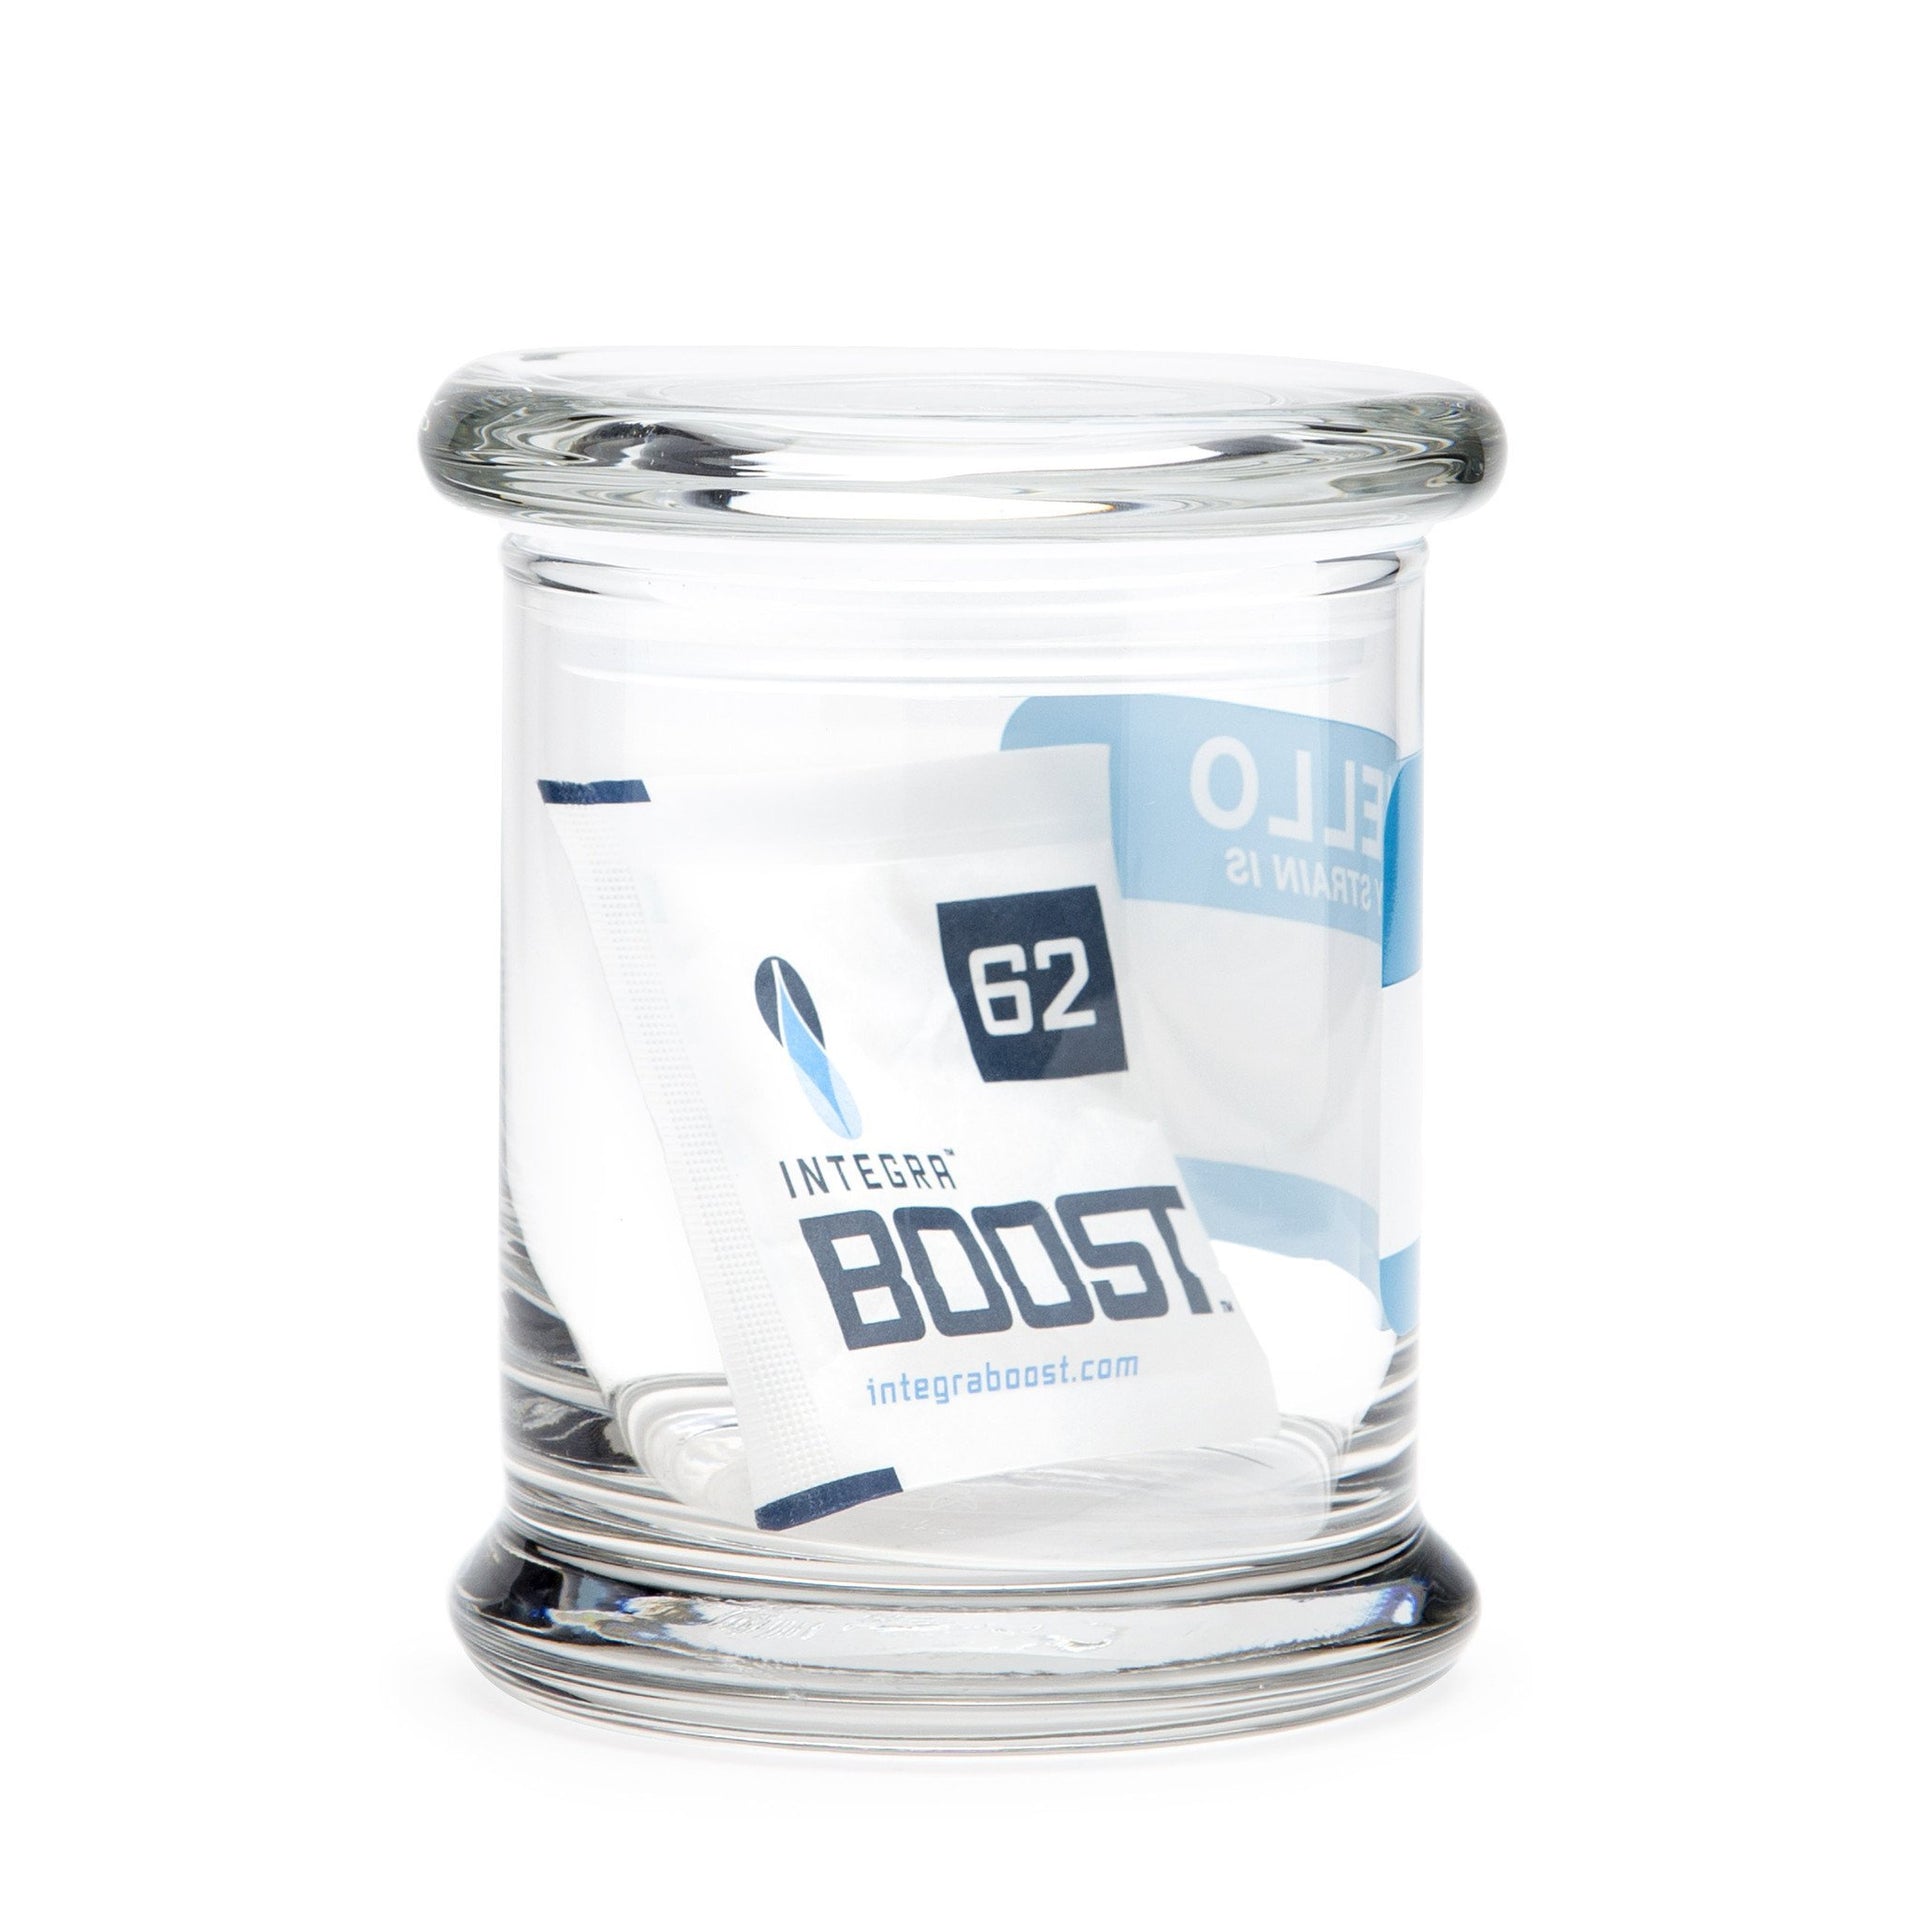 Integra BOOST 2-Way Humidity Regulator - 8g - 420 Science - The most trusted online smoke shop.